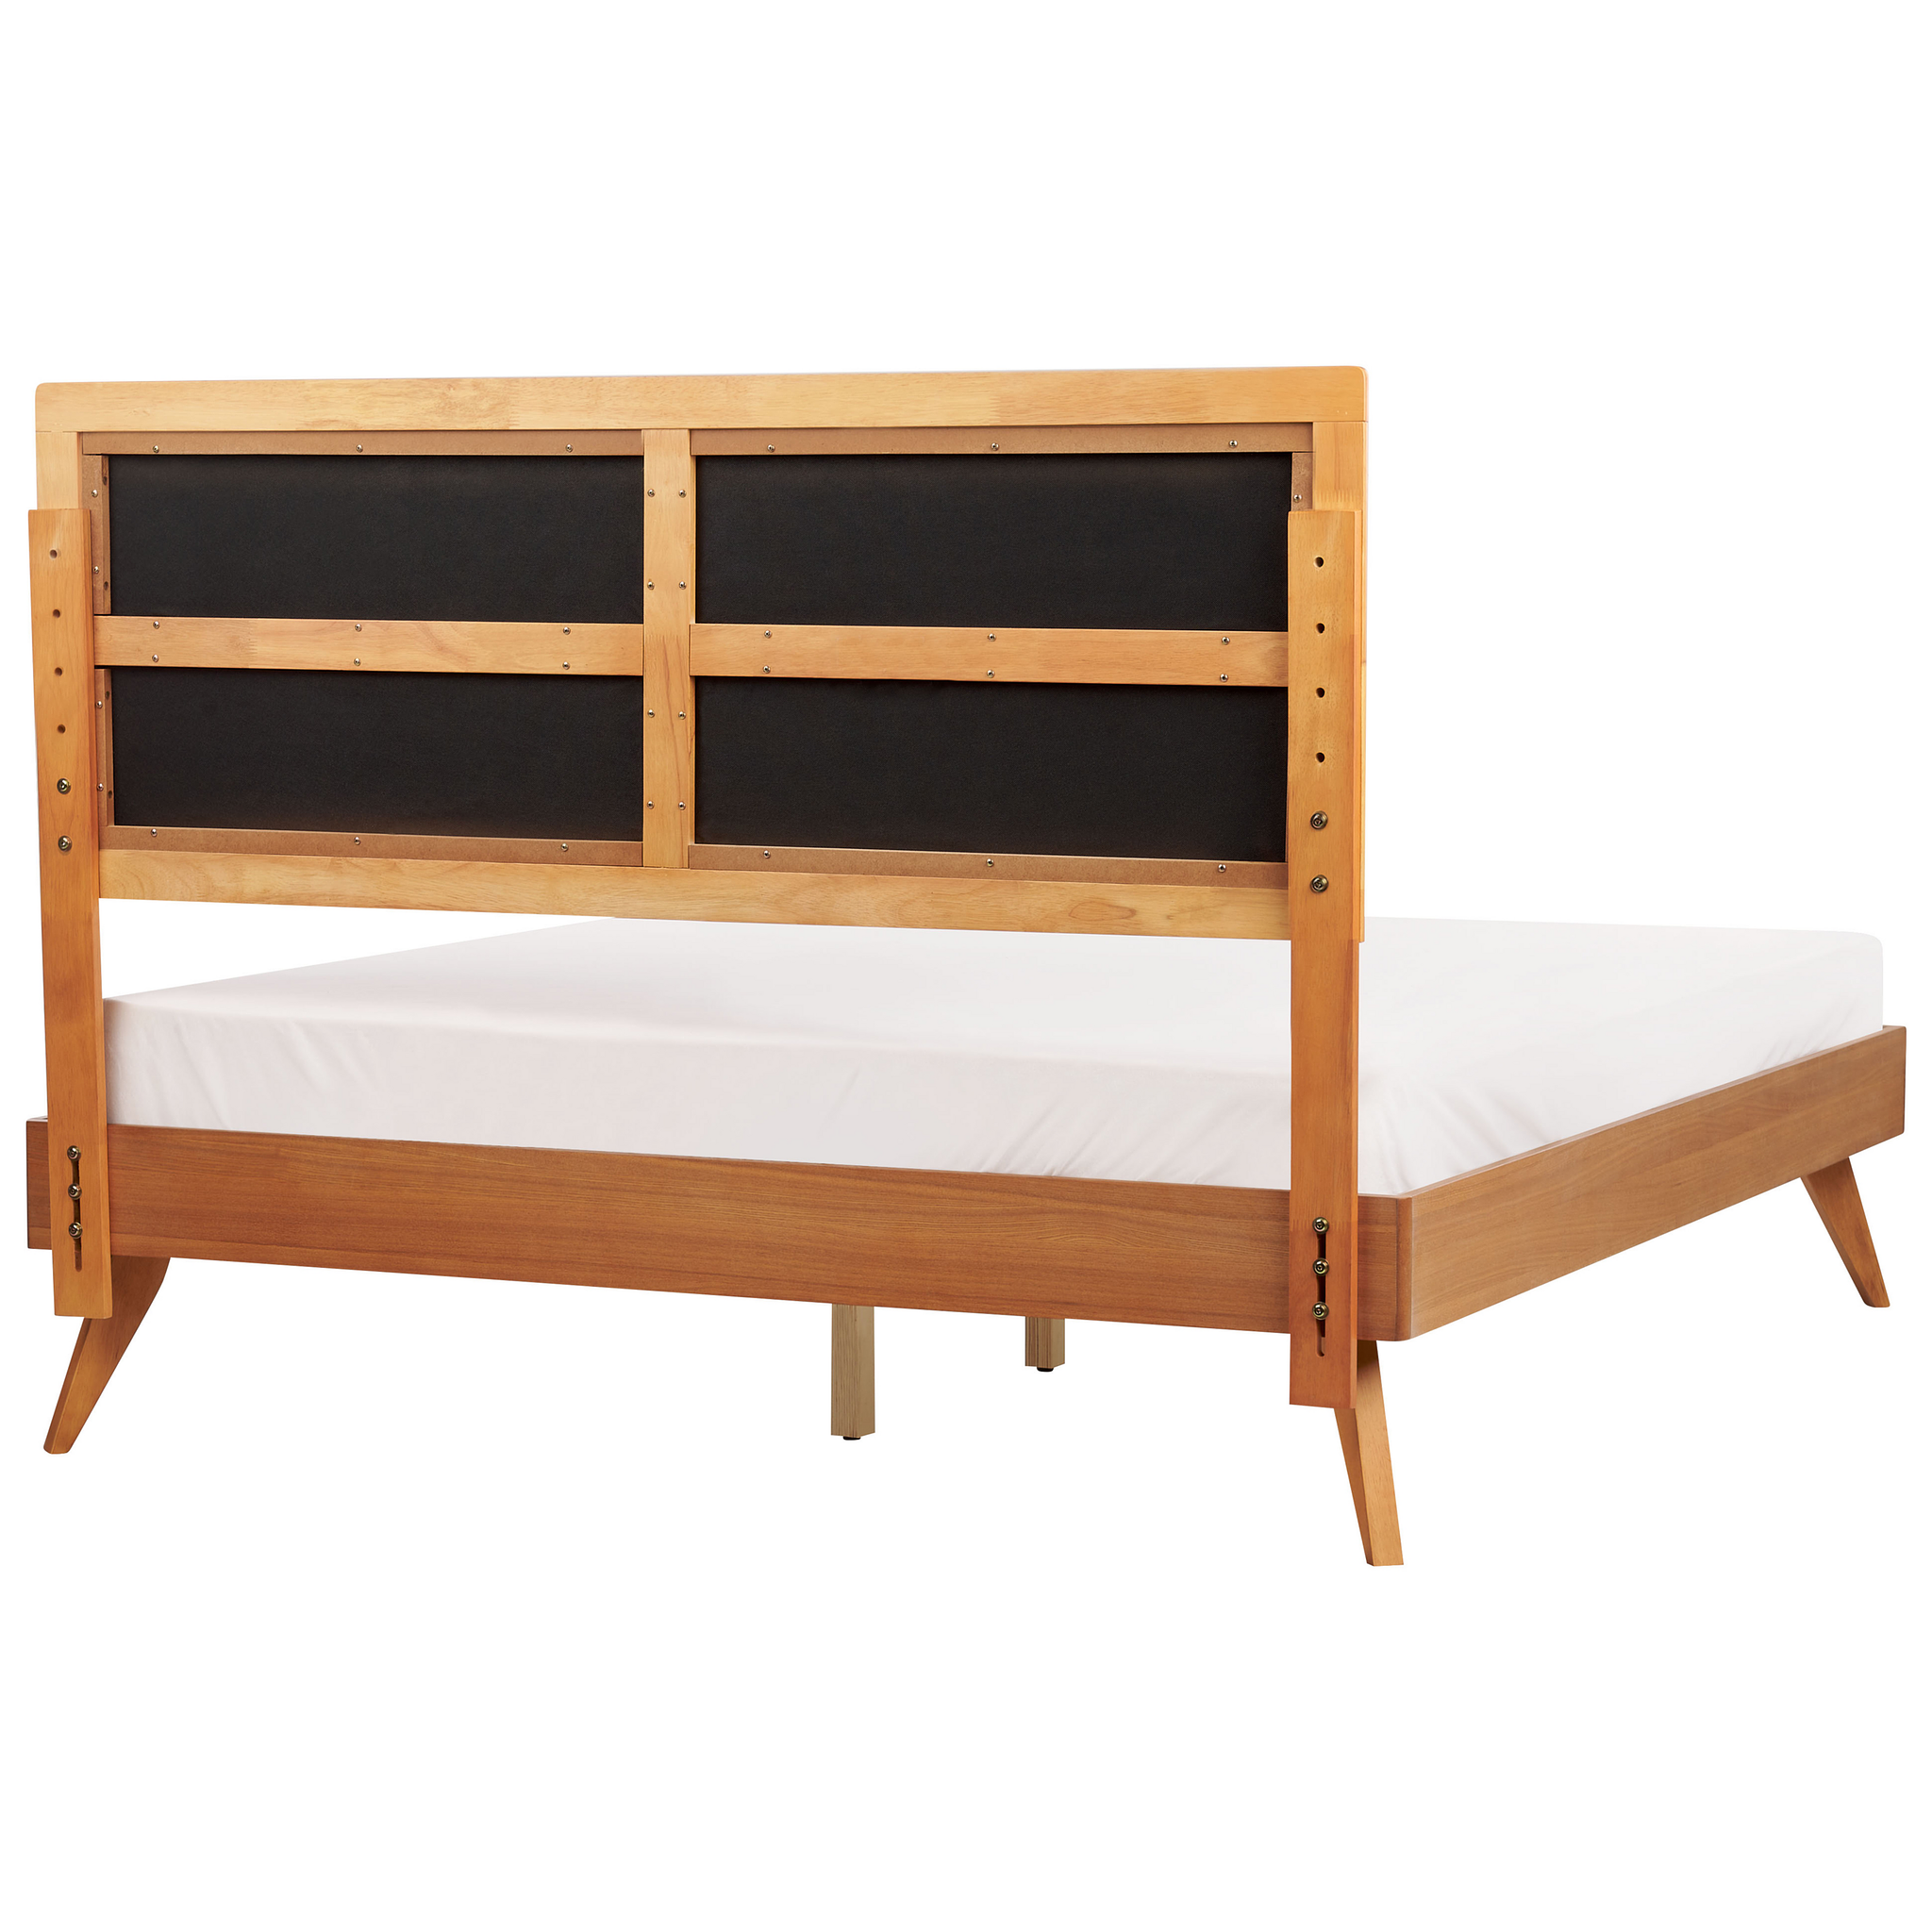 Beliani POISSY - Tweepersoonsbed - Lichthout - 160 x 200 cm - MDF